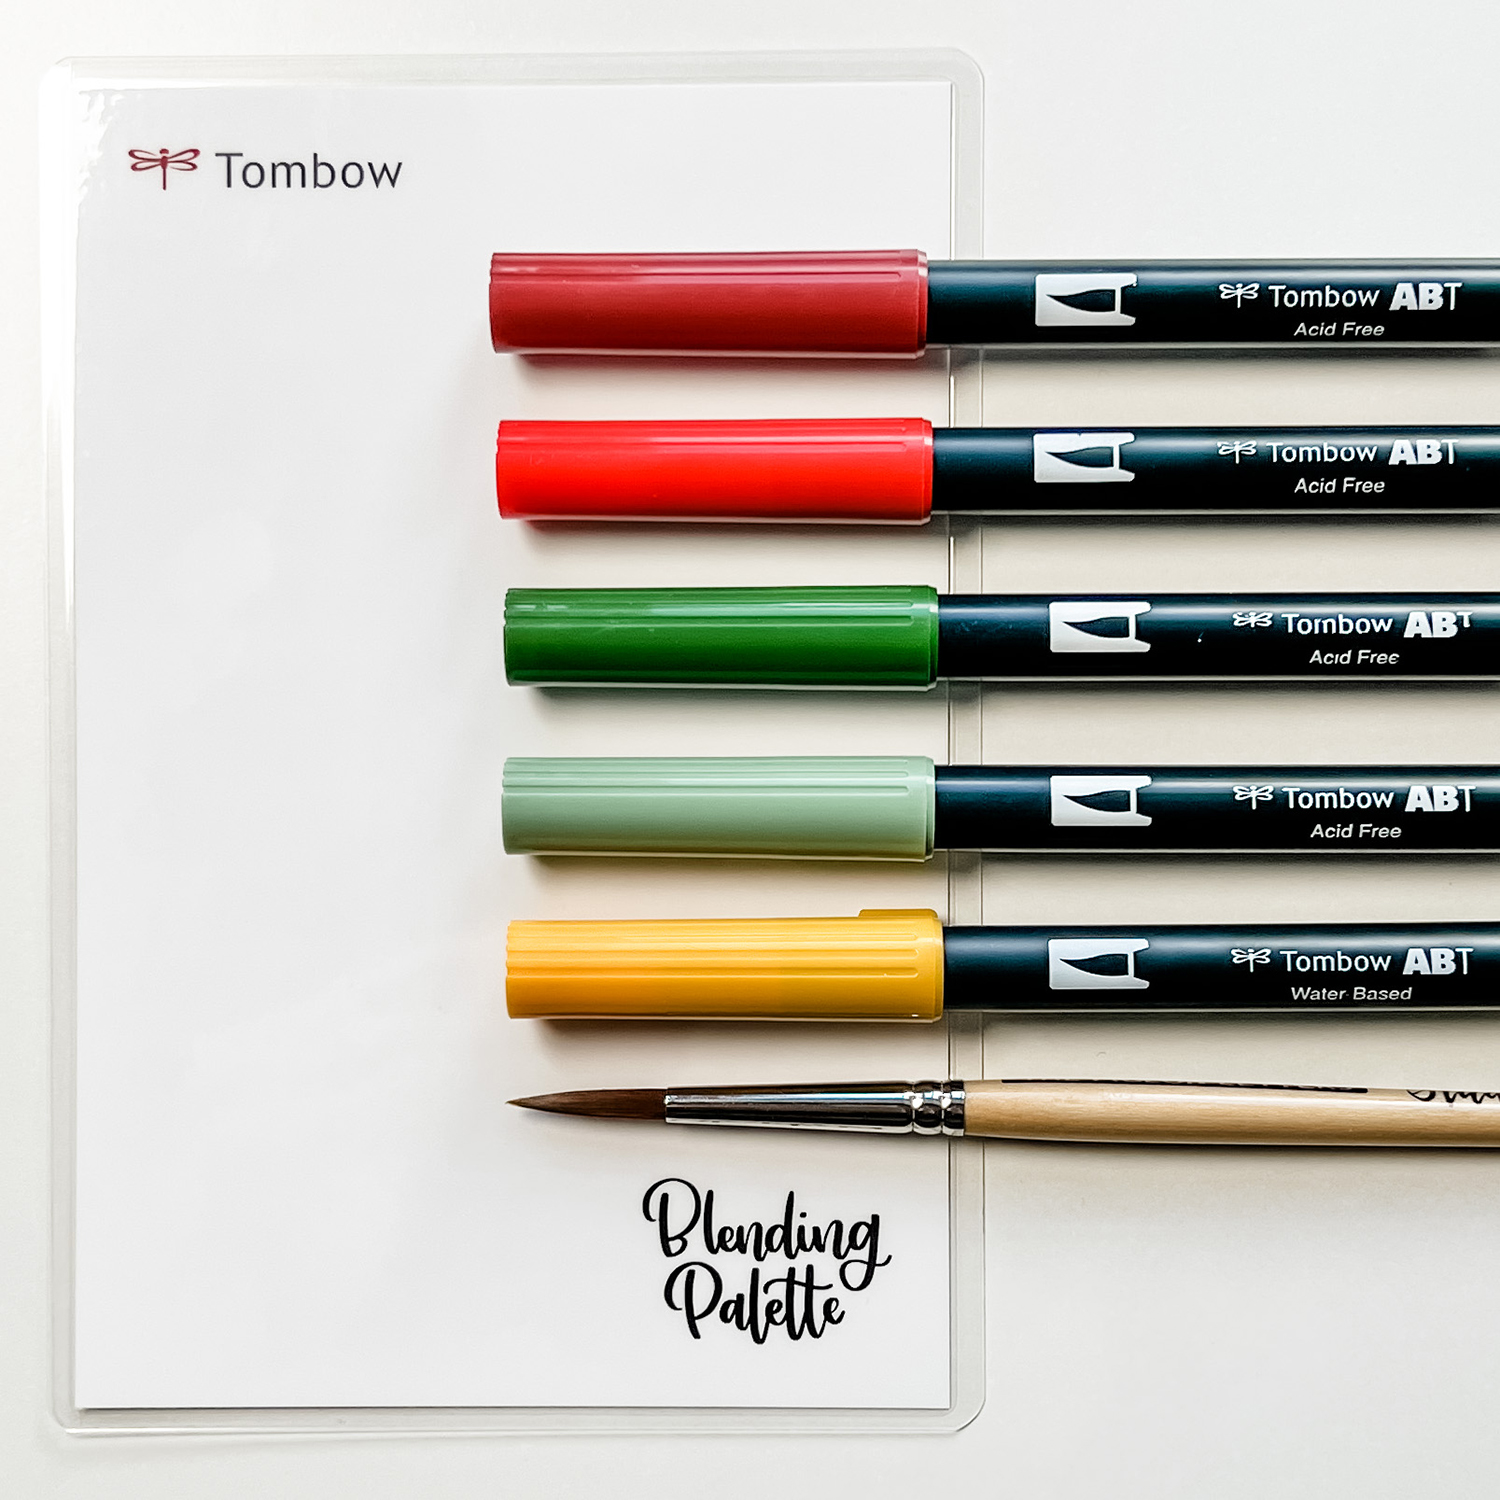 Tombow Brush Lettering Tutorial: How to Blend Tombow Markers